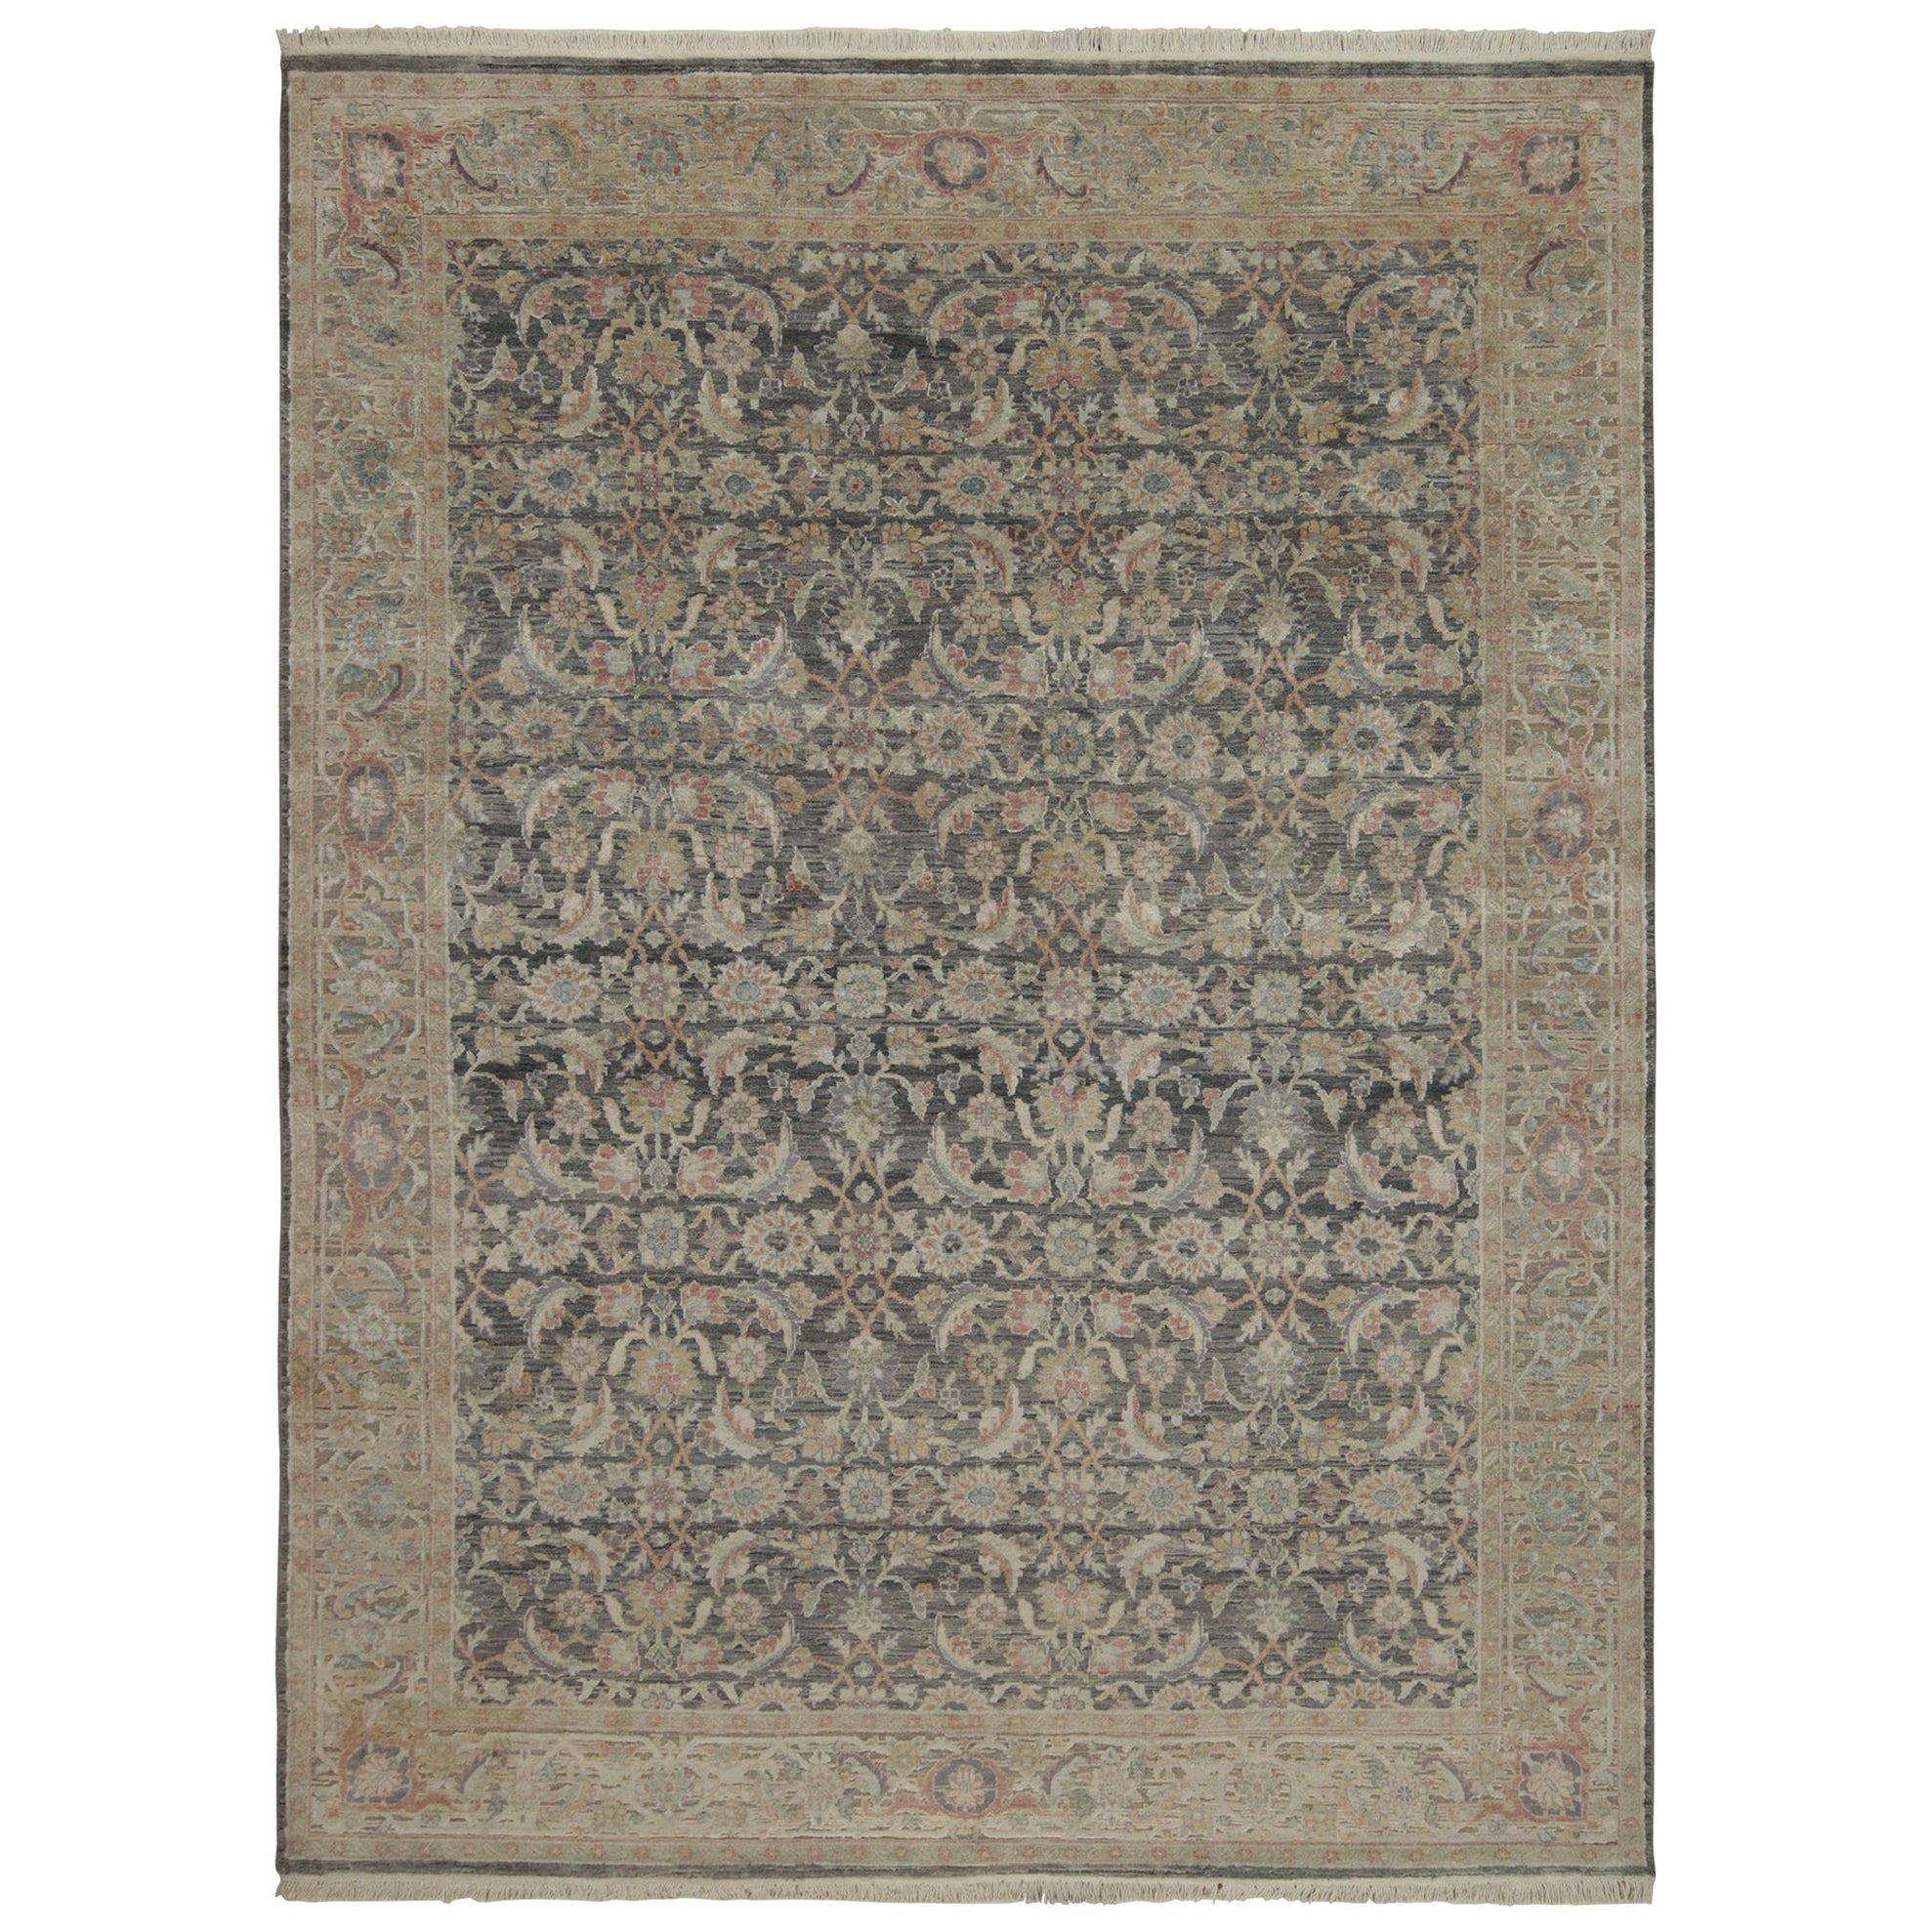 Rug & Kilim’s Herati Style Rug with Gray, Blue and Beige-Brown Floral Patterns